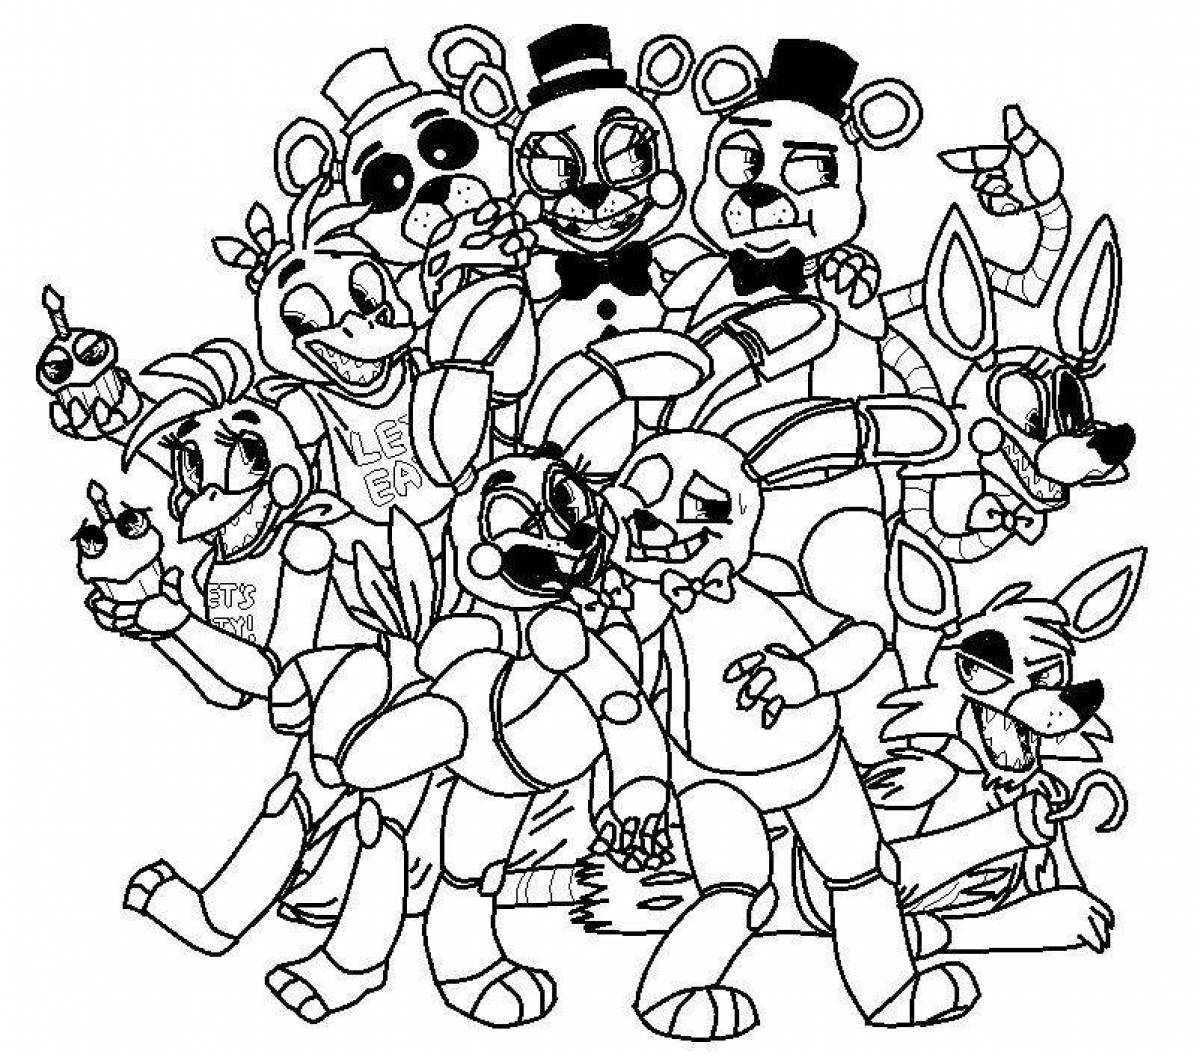 Cute fnaf world coloring page